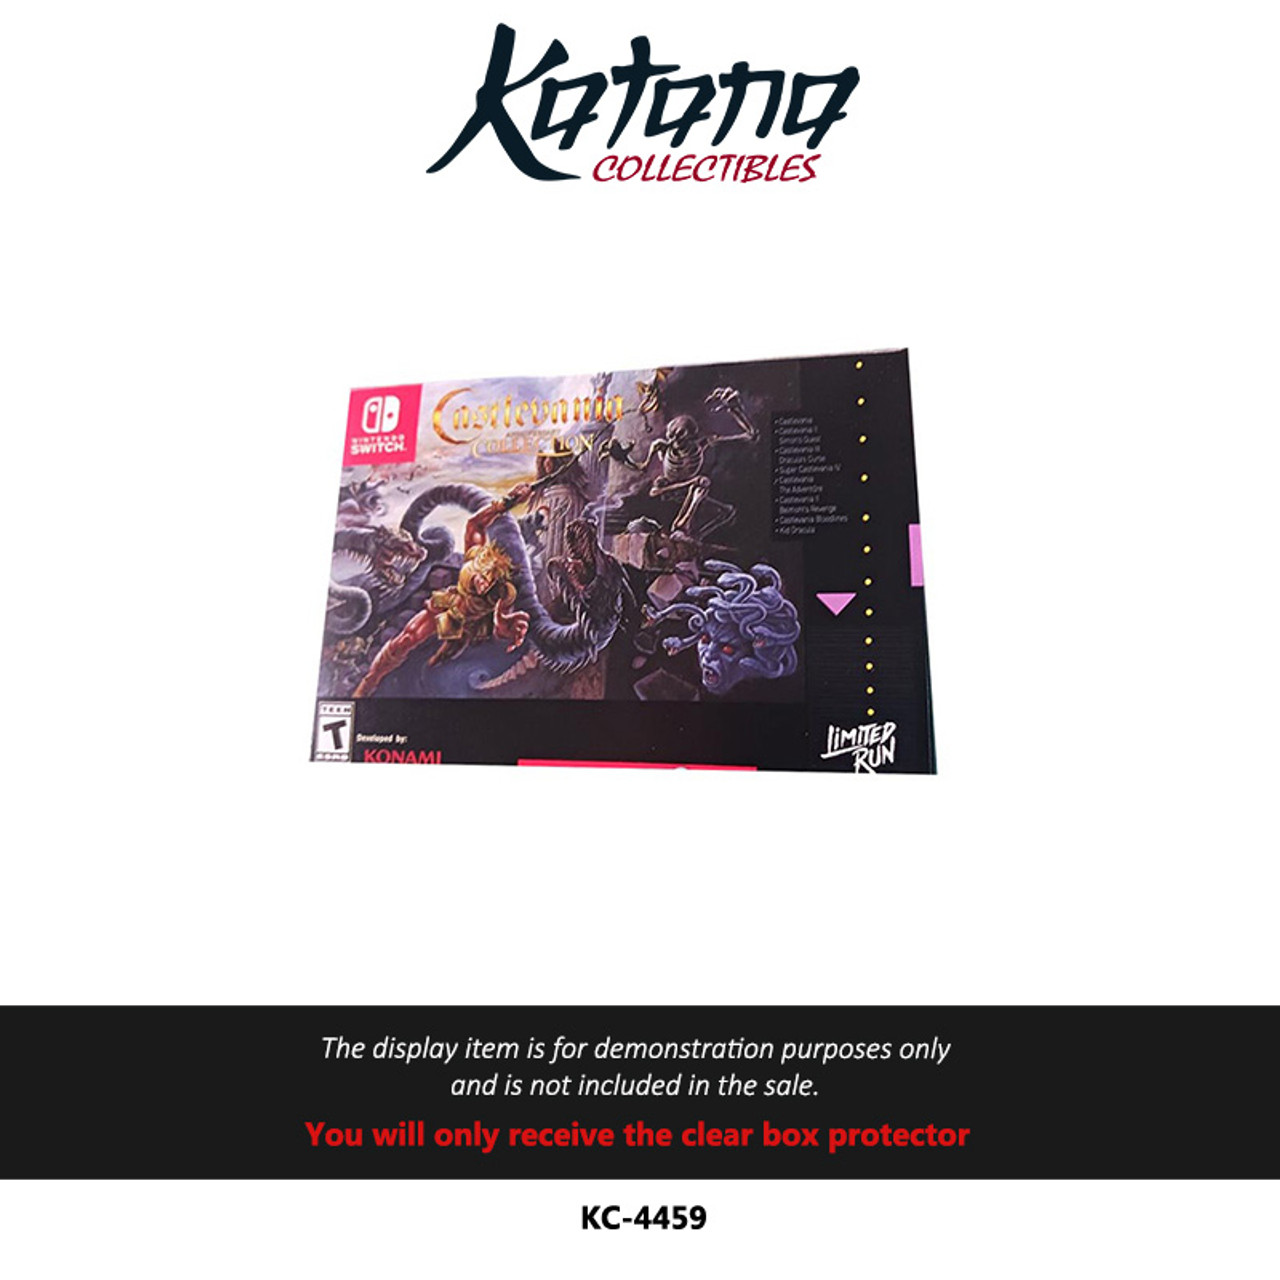 Katana Collectibles Protector For Castlevania Anniversary Collection Pax West Edition for Switch